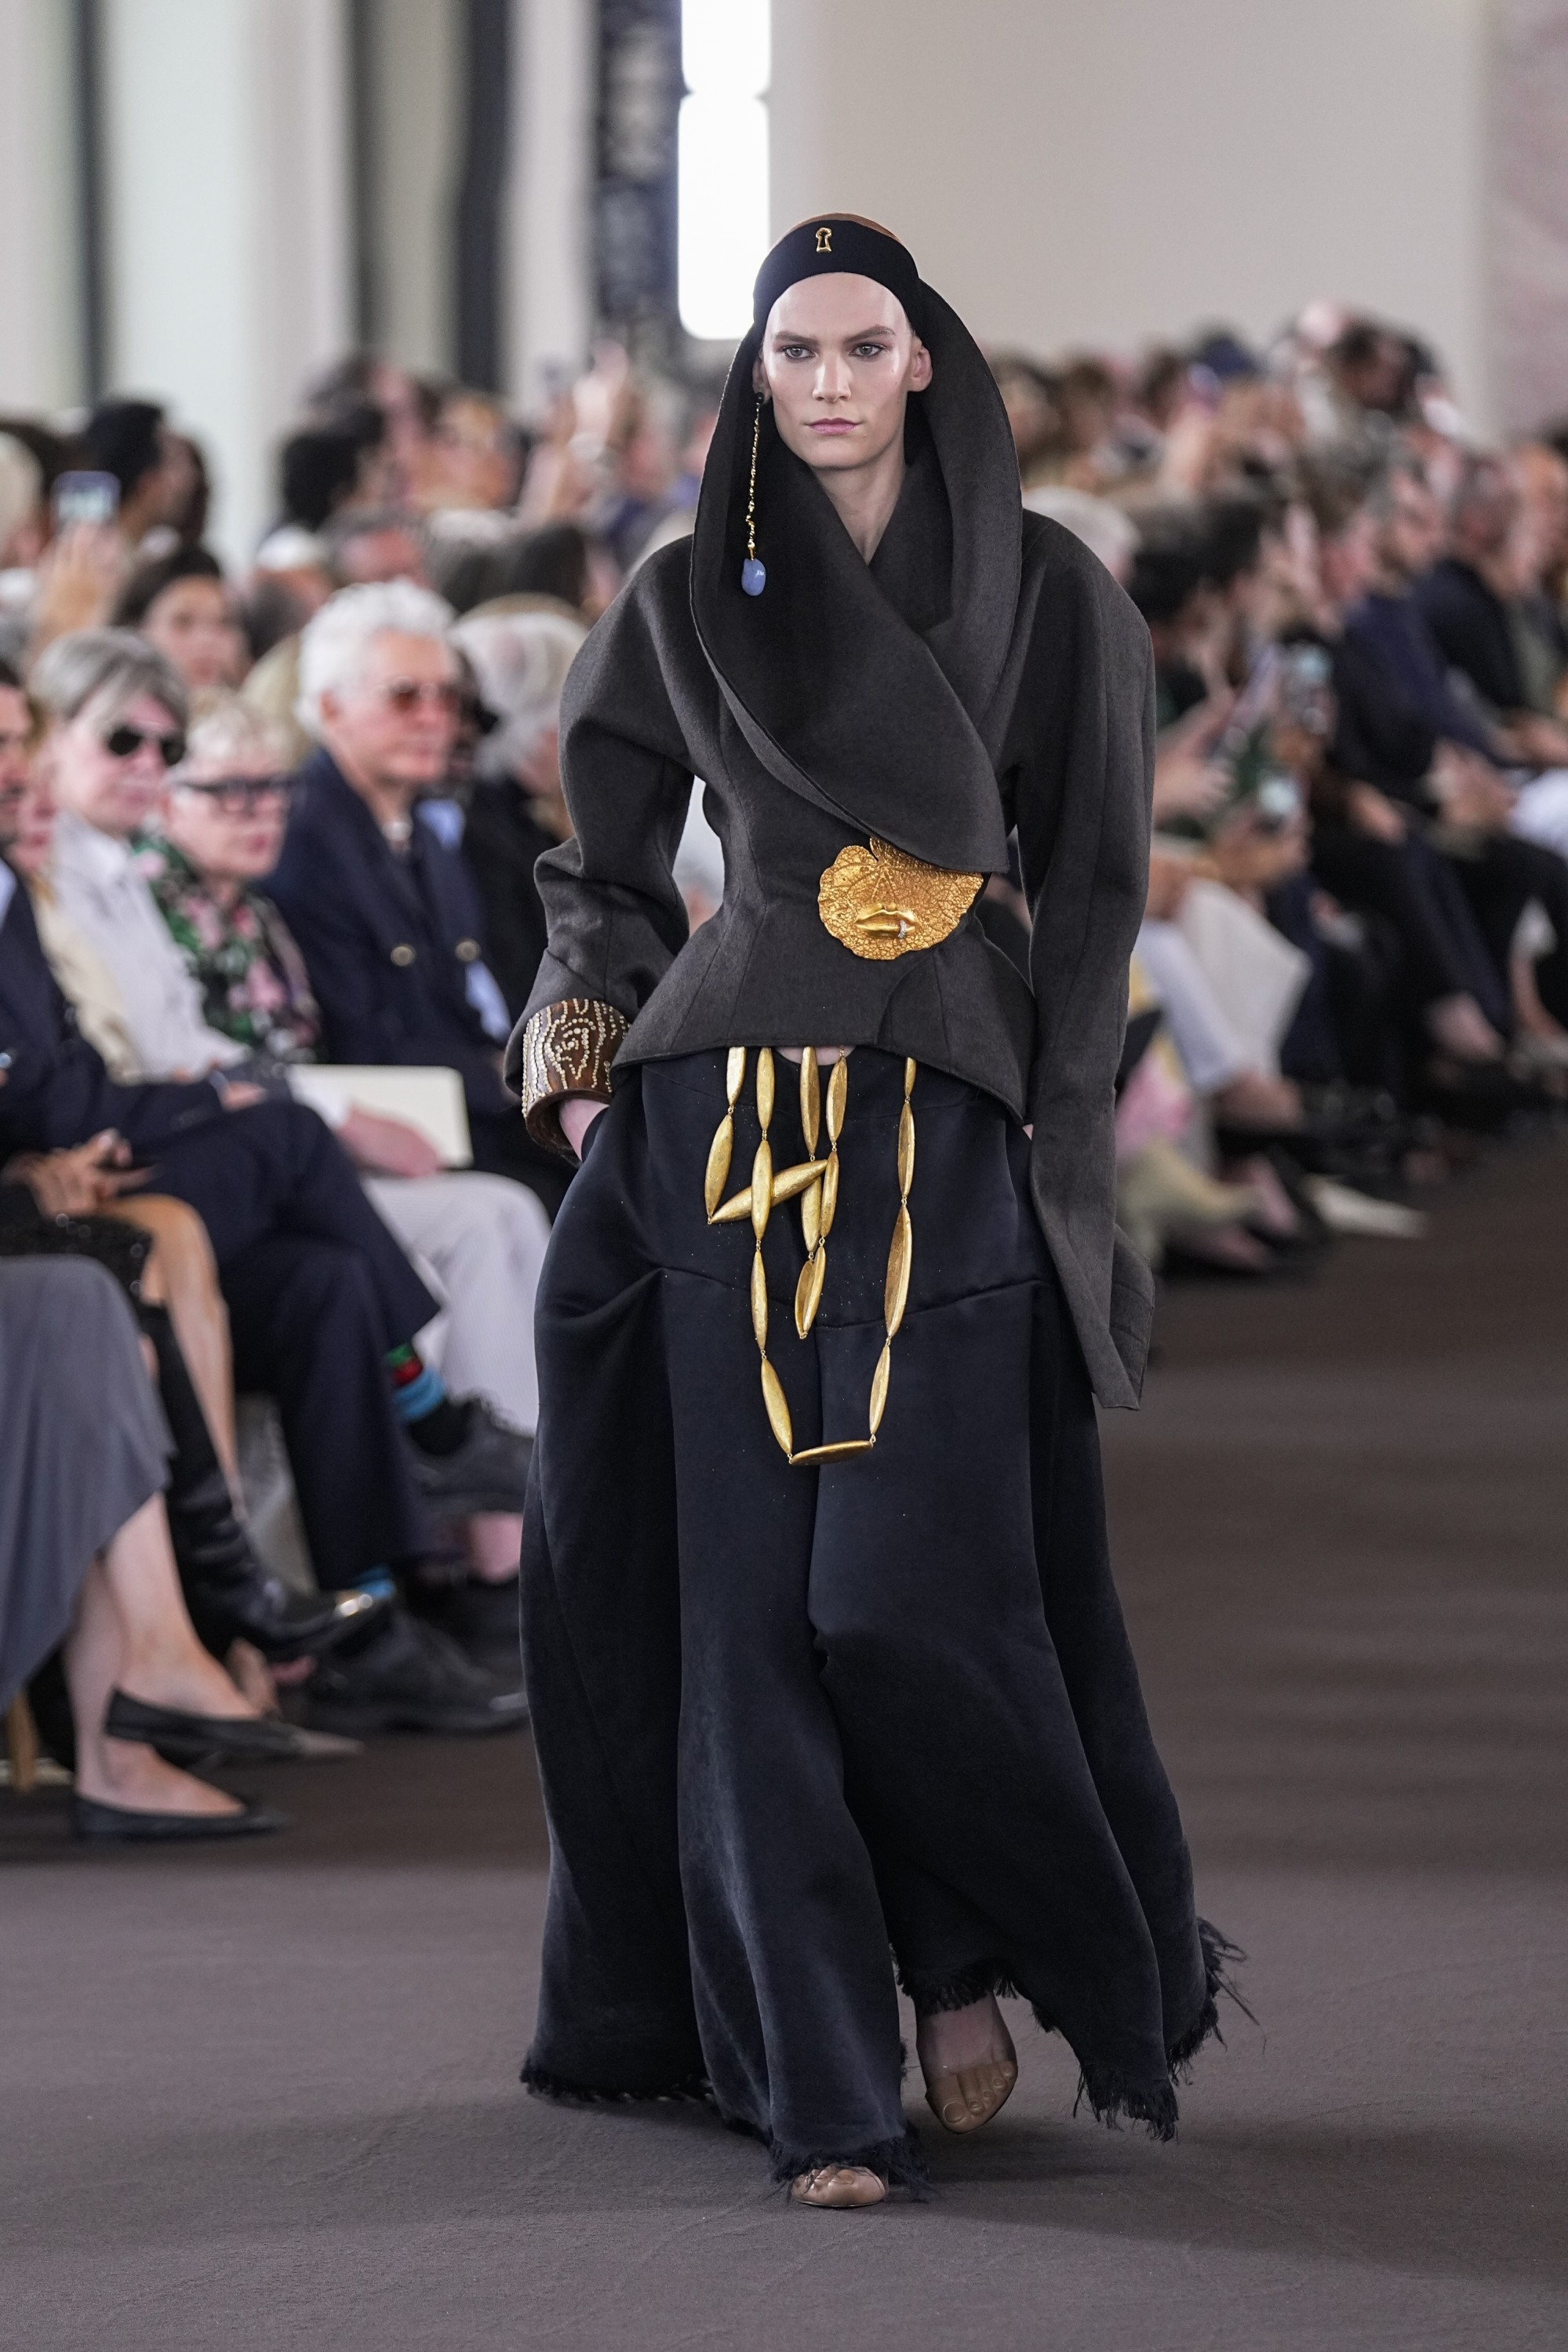 On with the show: Paris Haute Couture Week day 1 round up – while LVMH ...